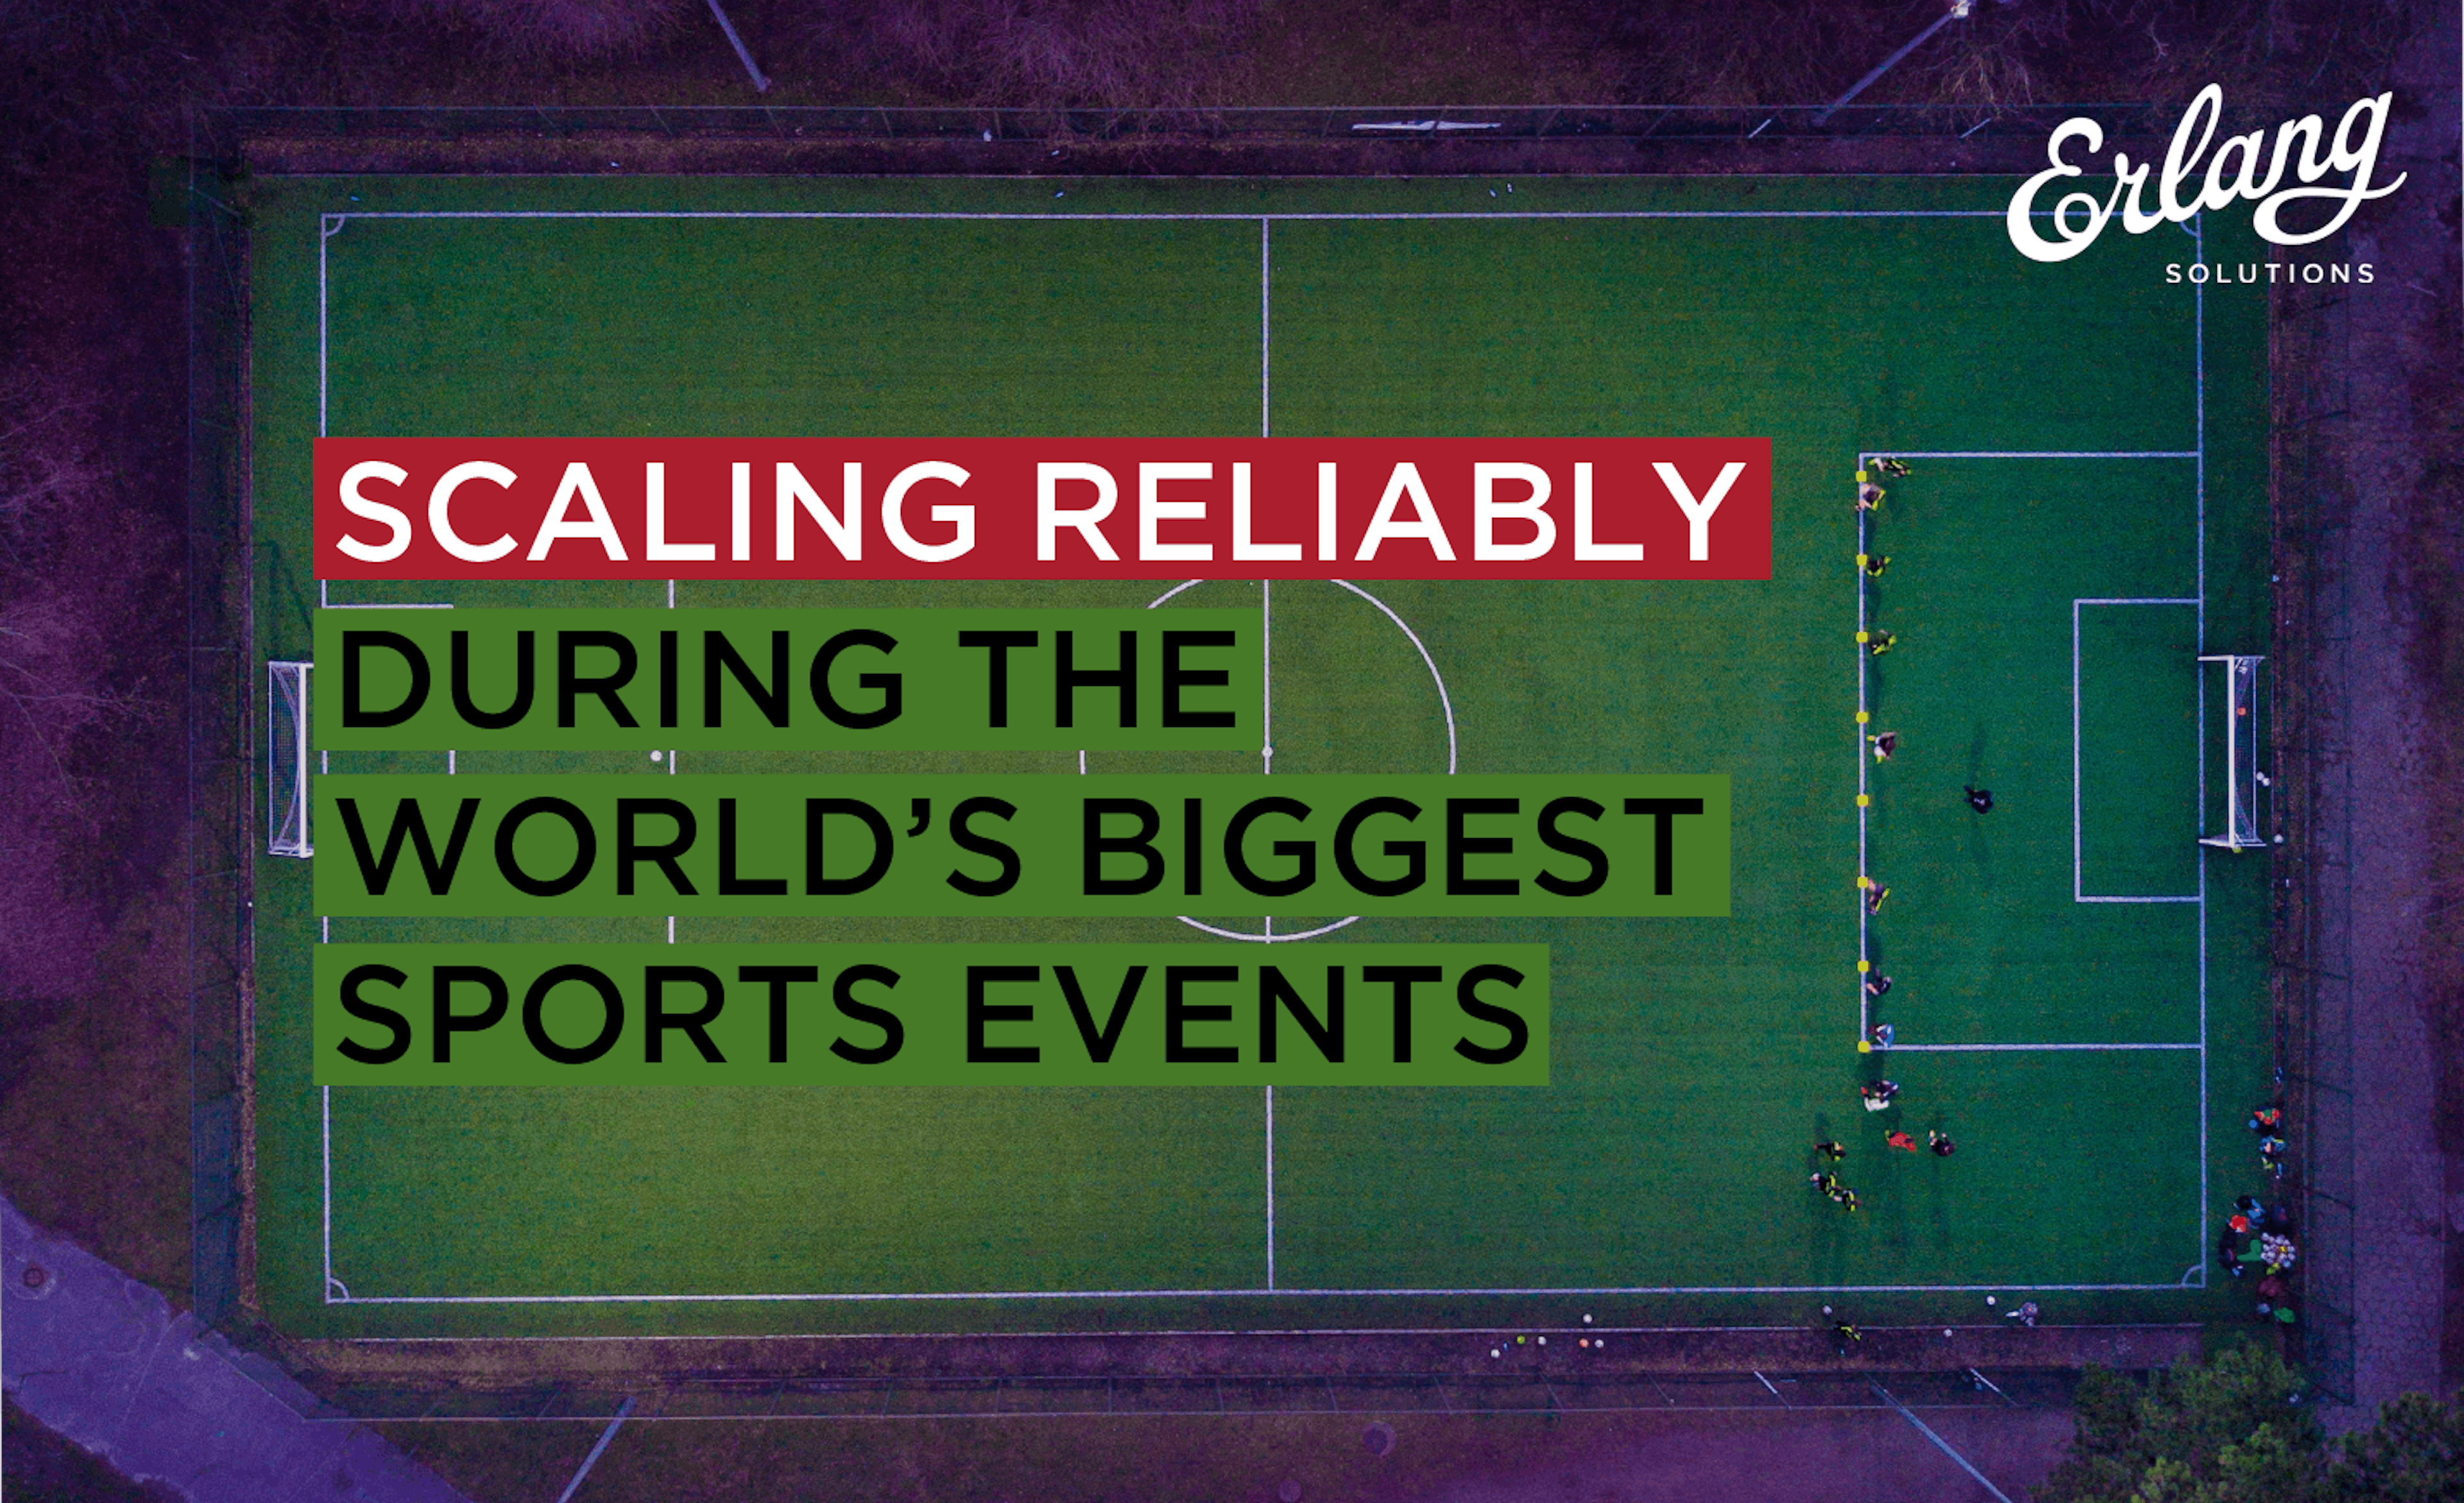 featured image - Scaling reliably during the World’s biggest sports events